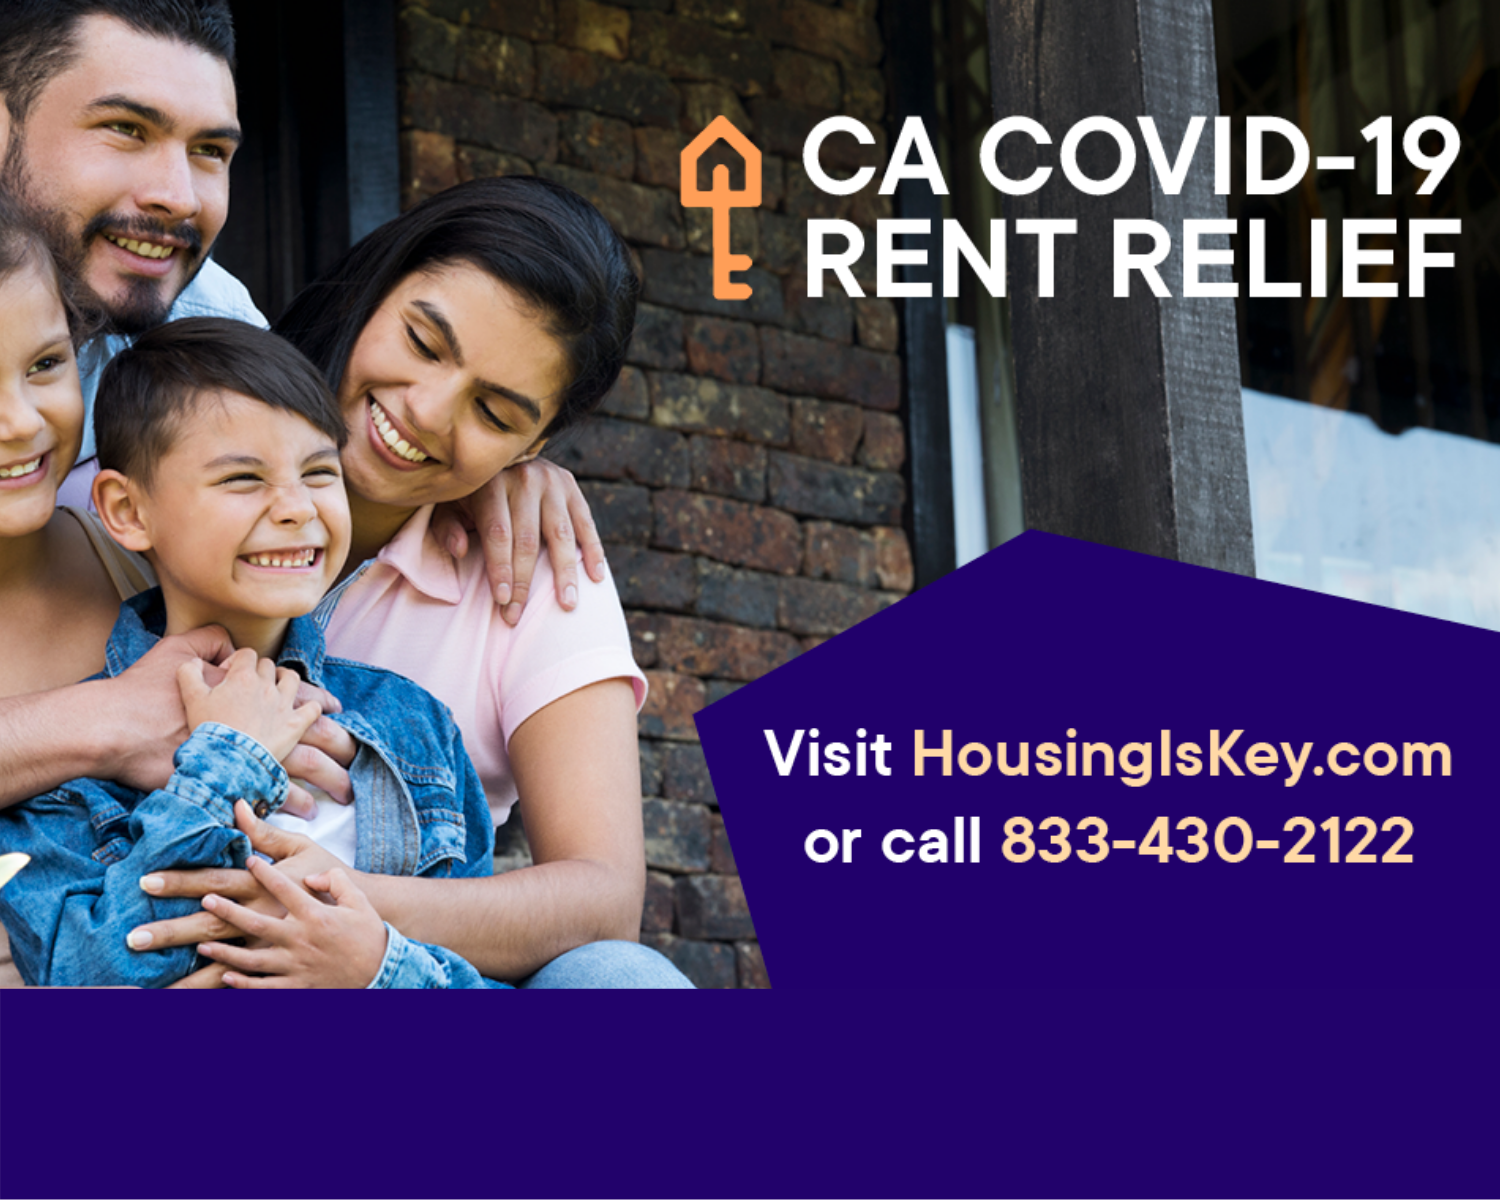 Housing is Key - COVID-19 Rent Relief